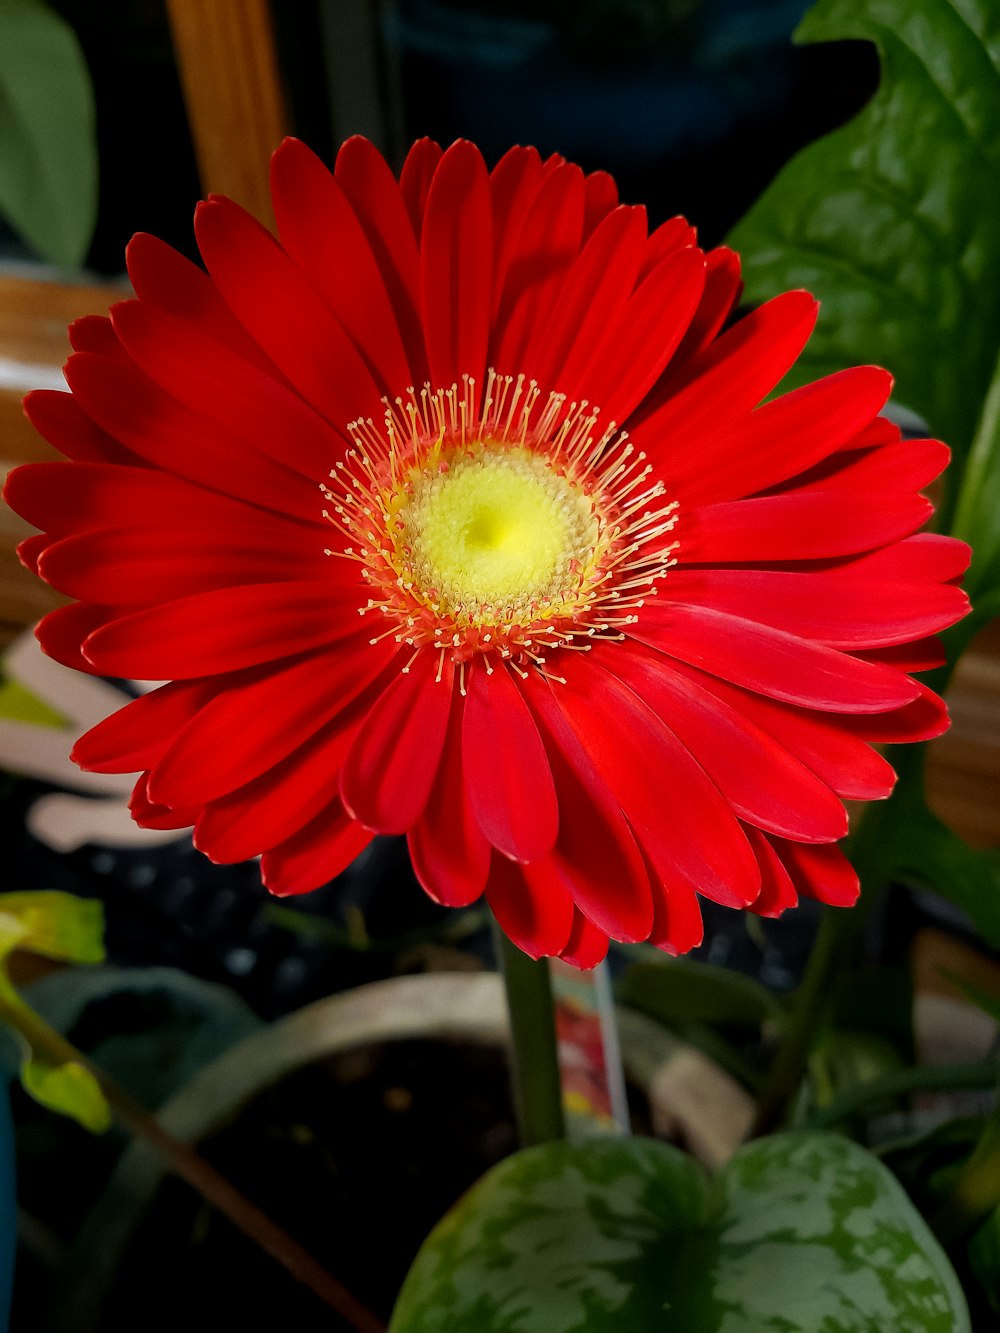 a bright red flower with a yellow center